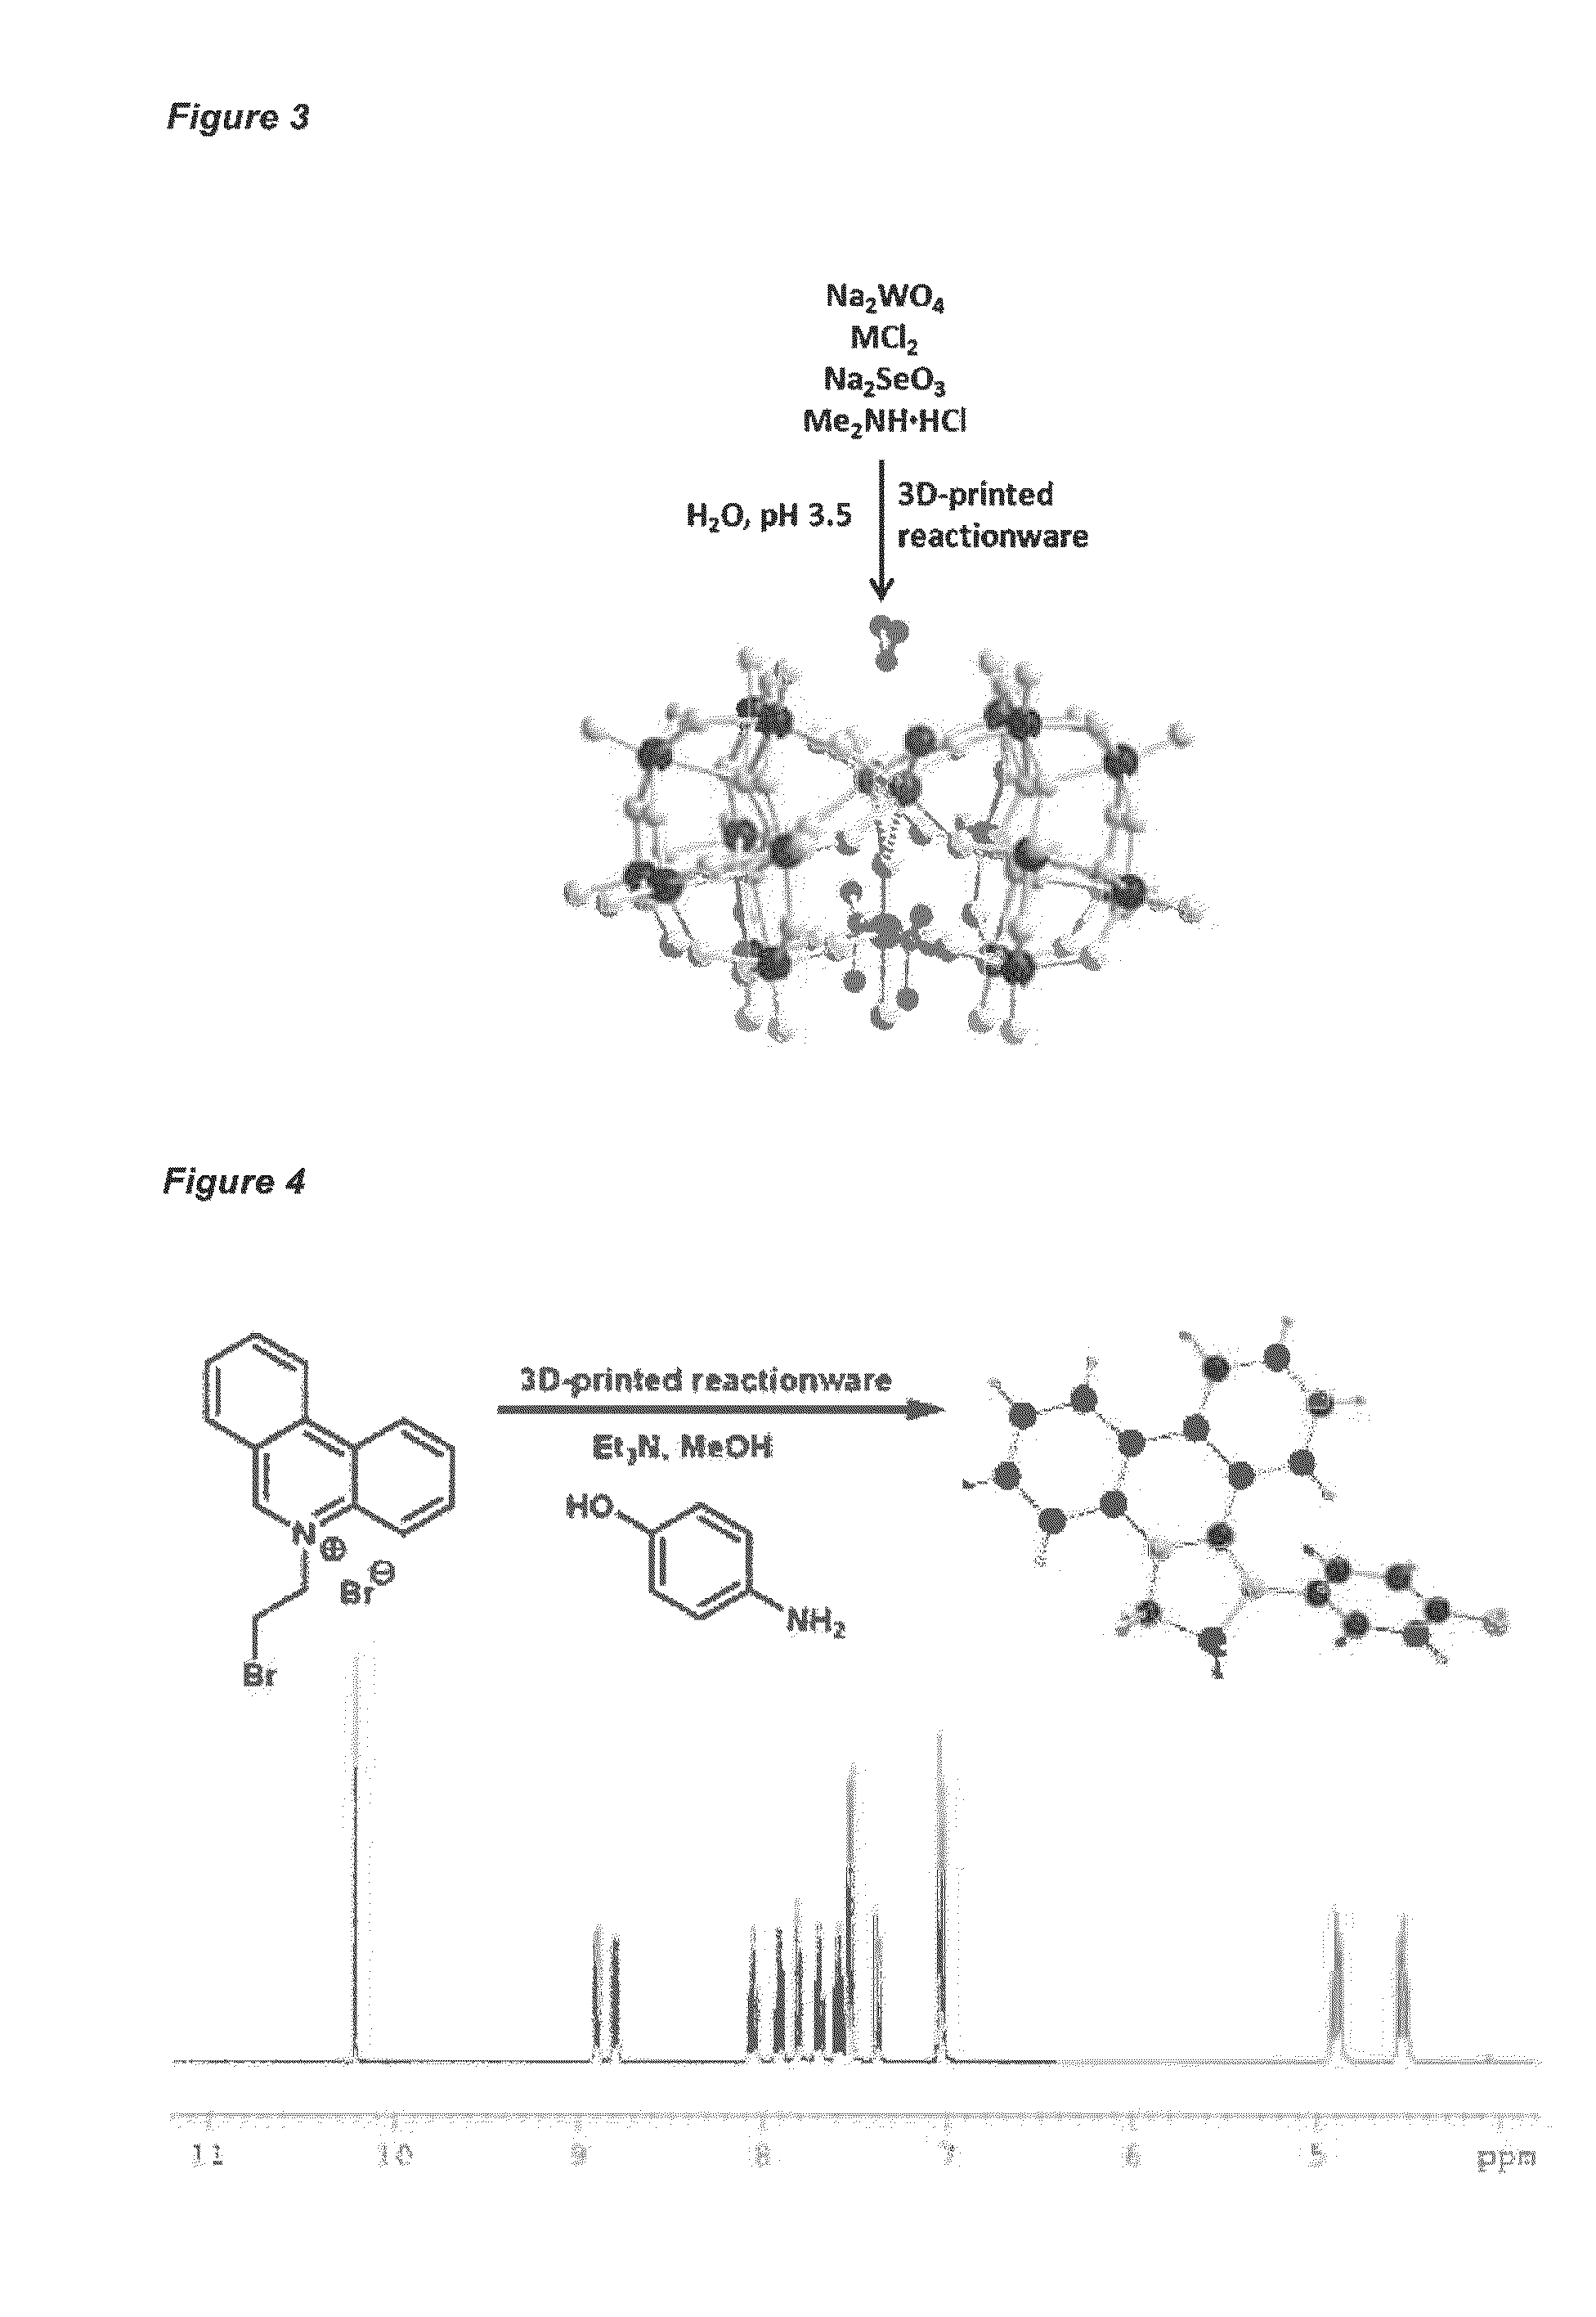 Apparatus and methods for the preparation of reaction vessels